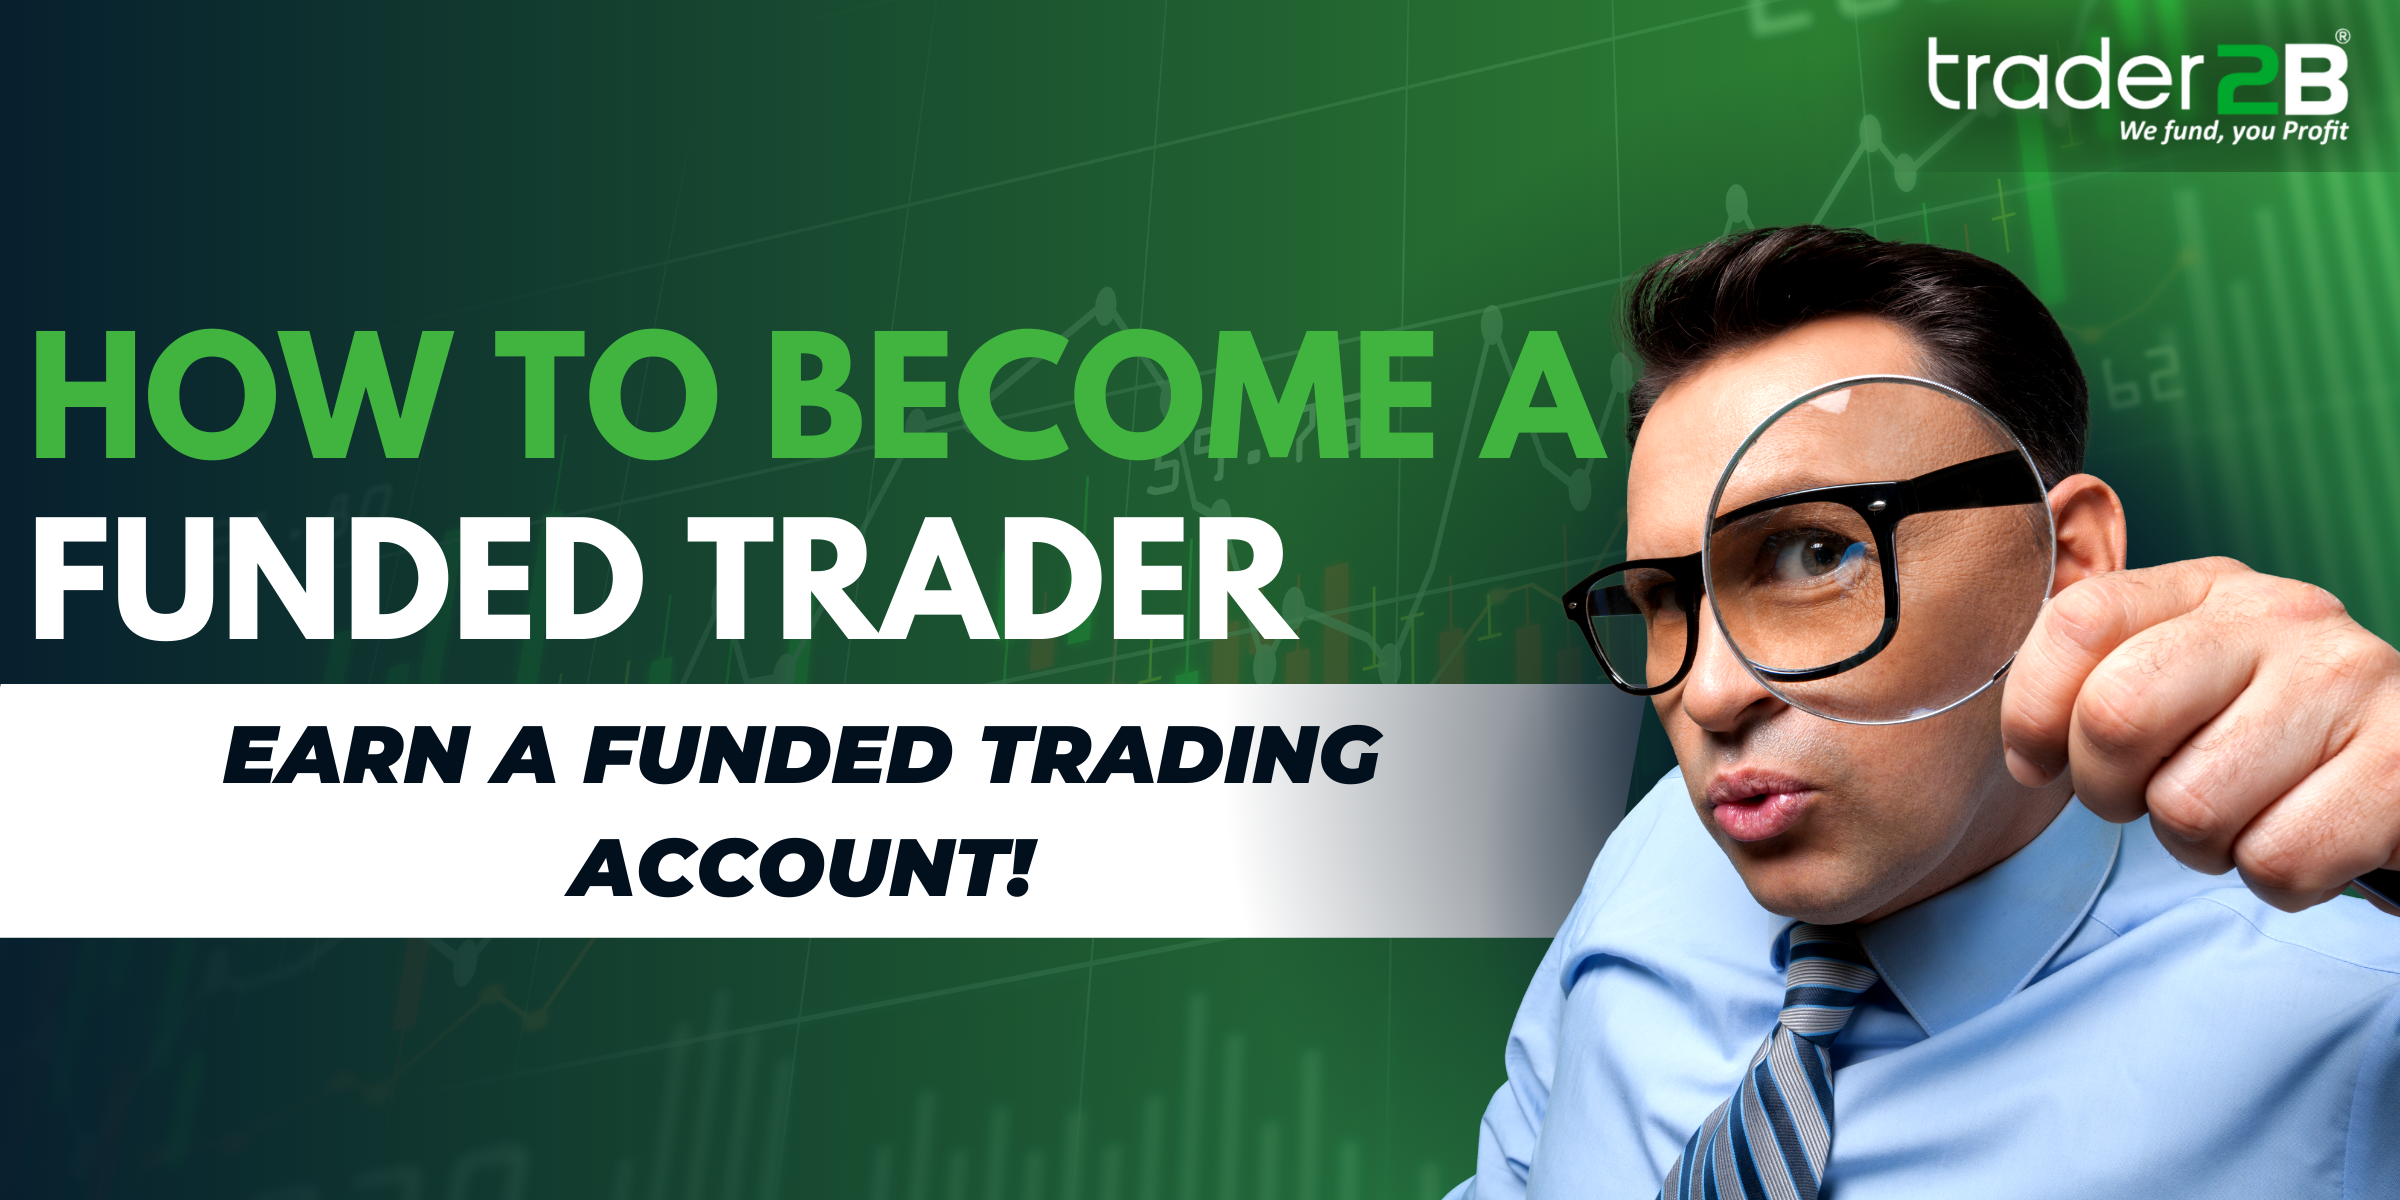 How to become a Funded Trader